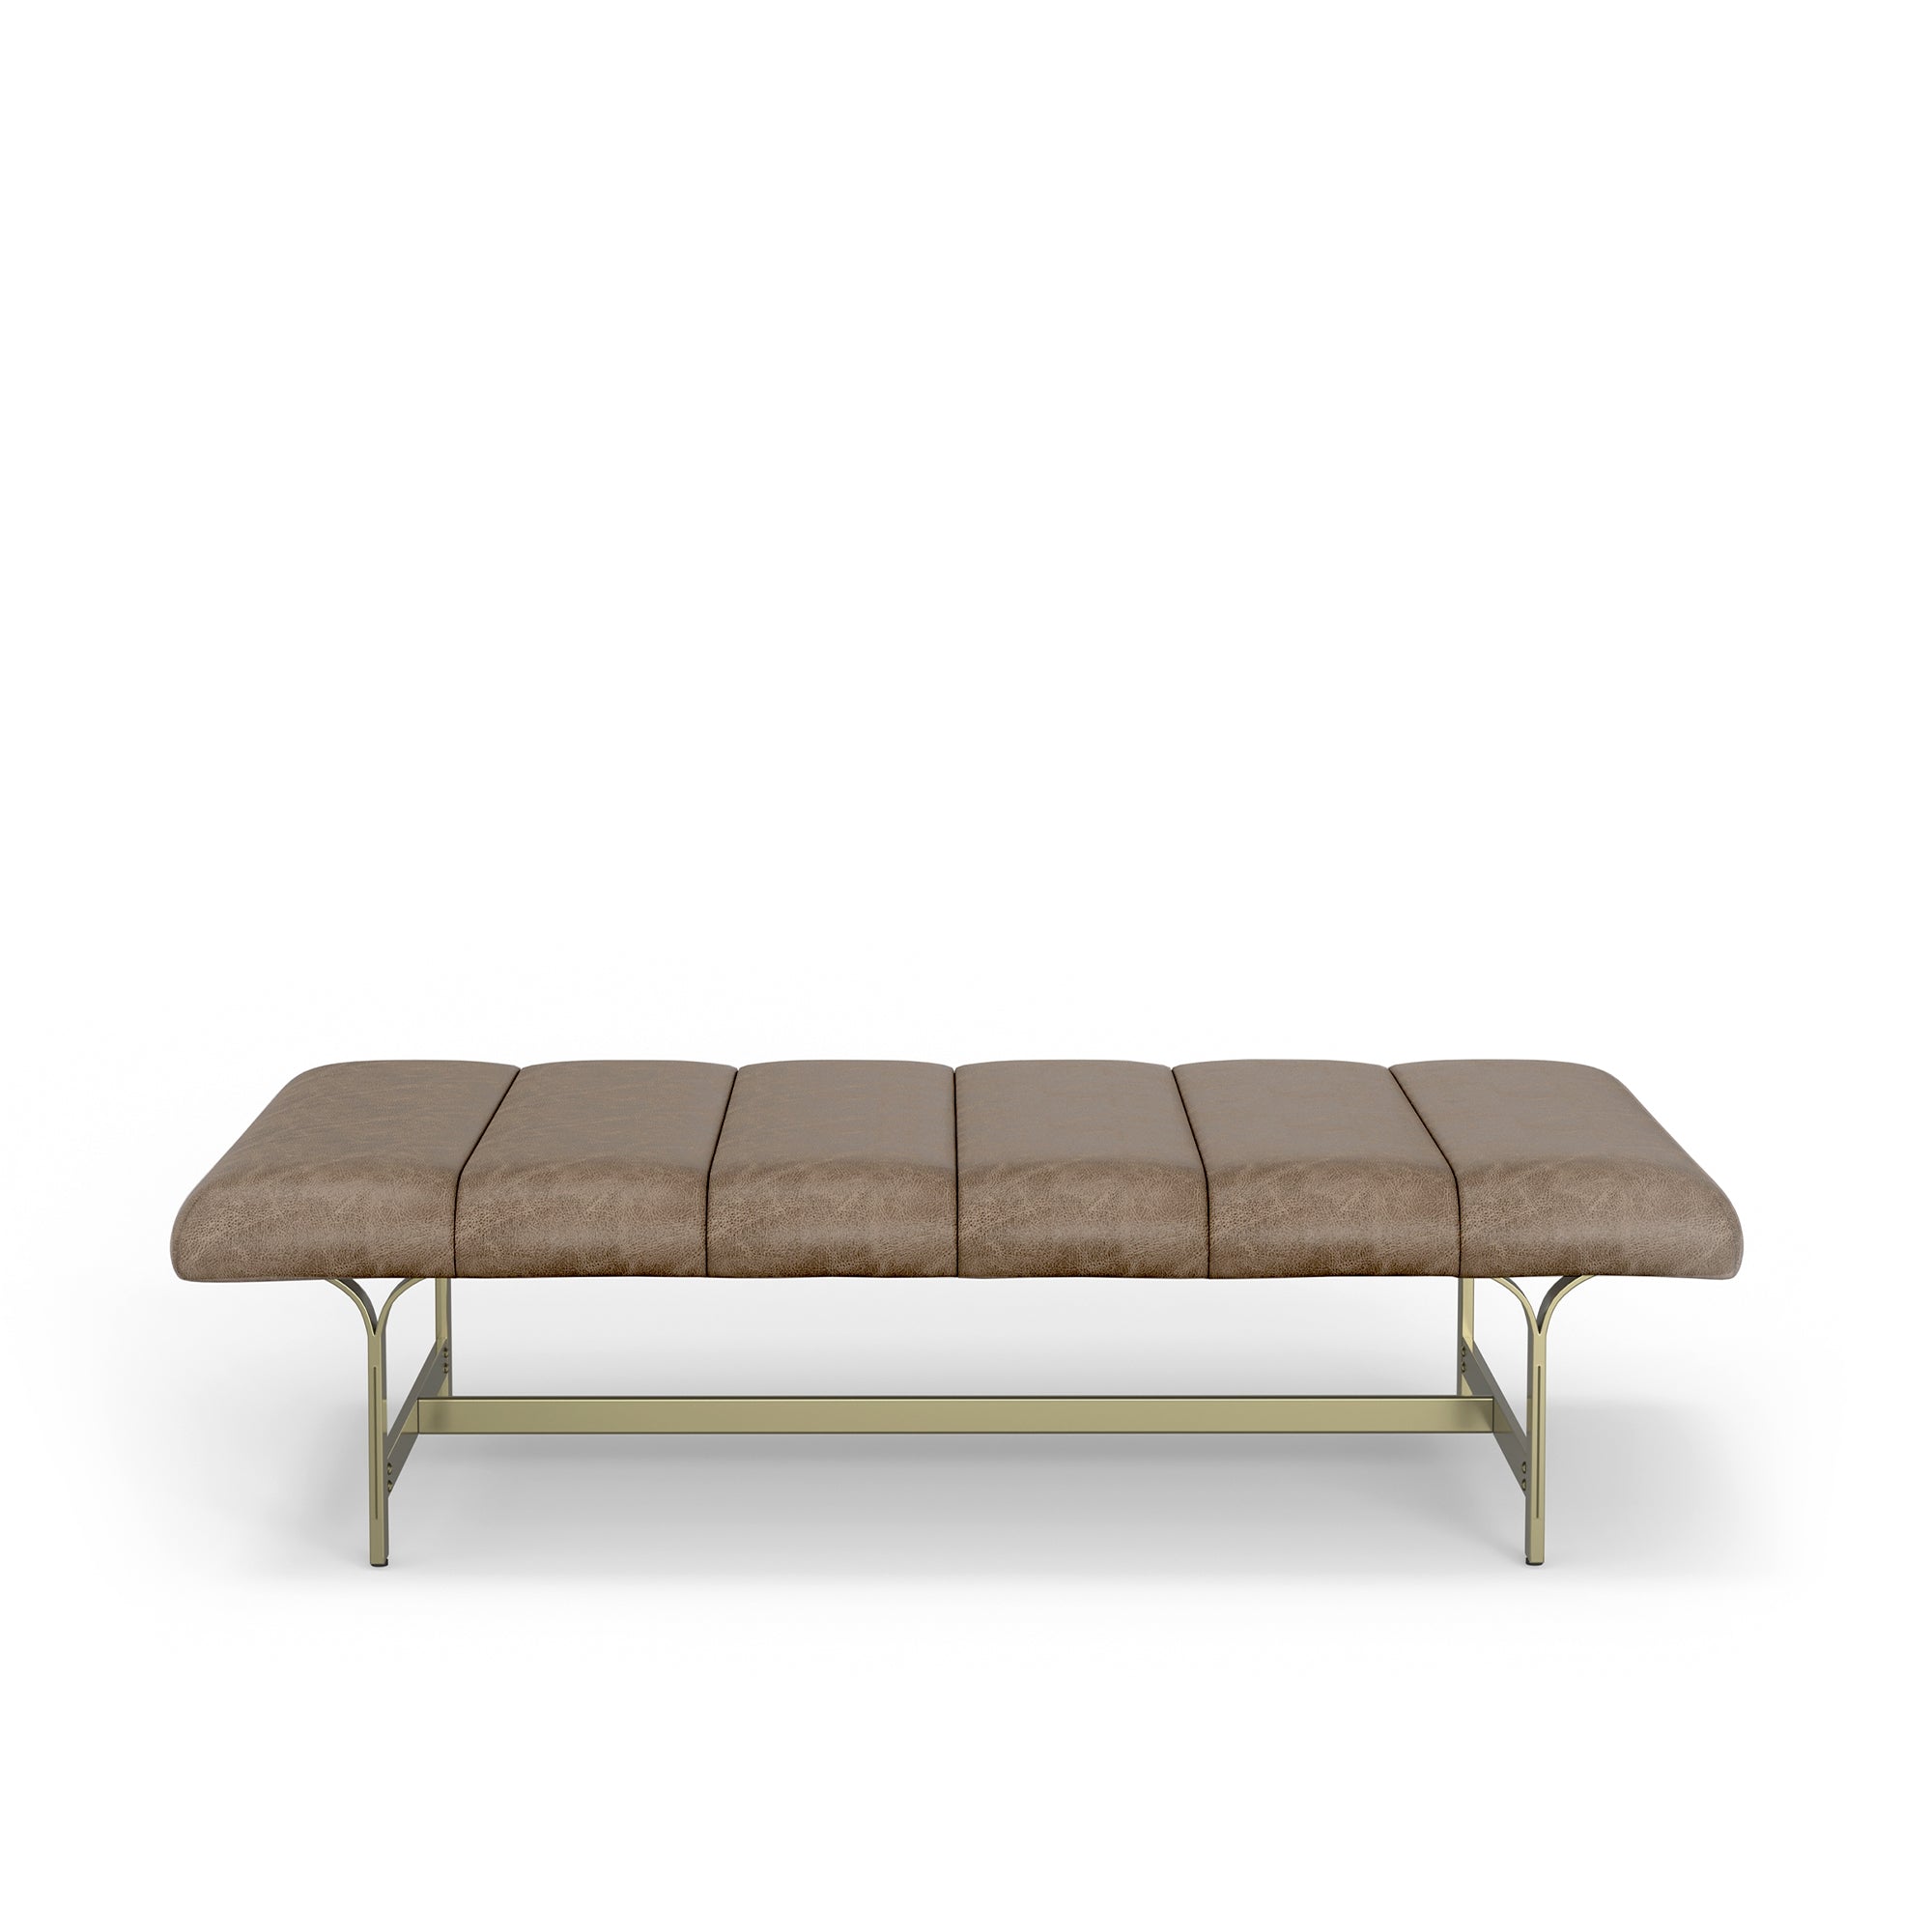 Studio A Upholstered Leather Coffee Table with Metal Base